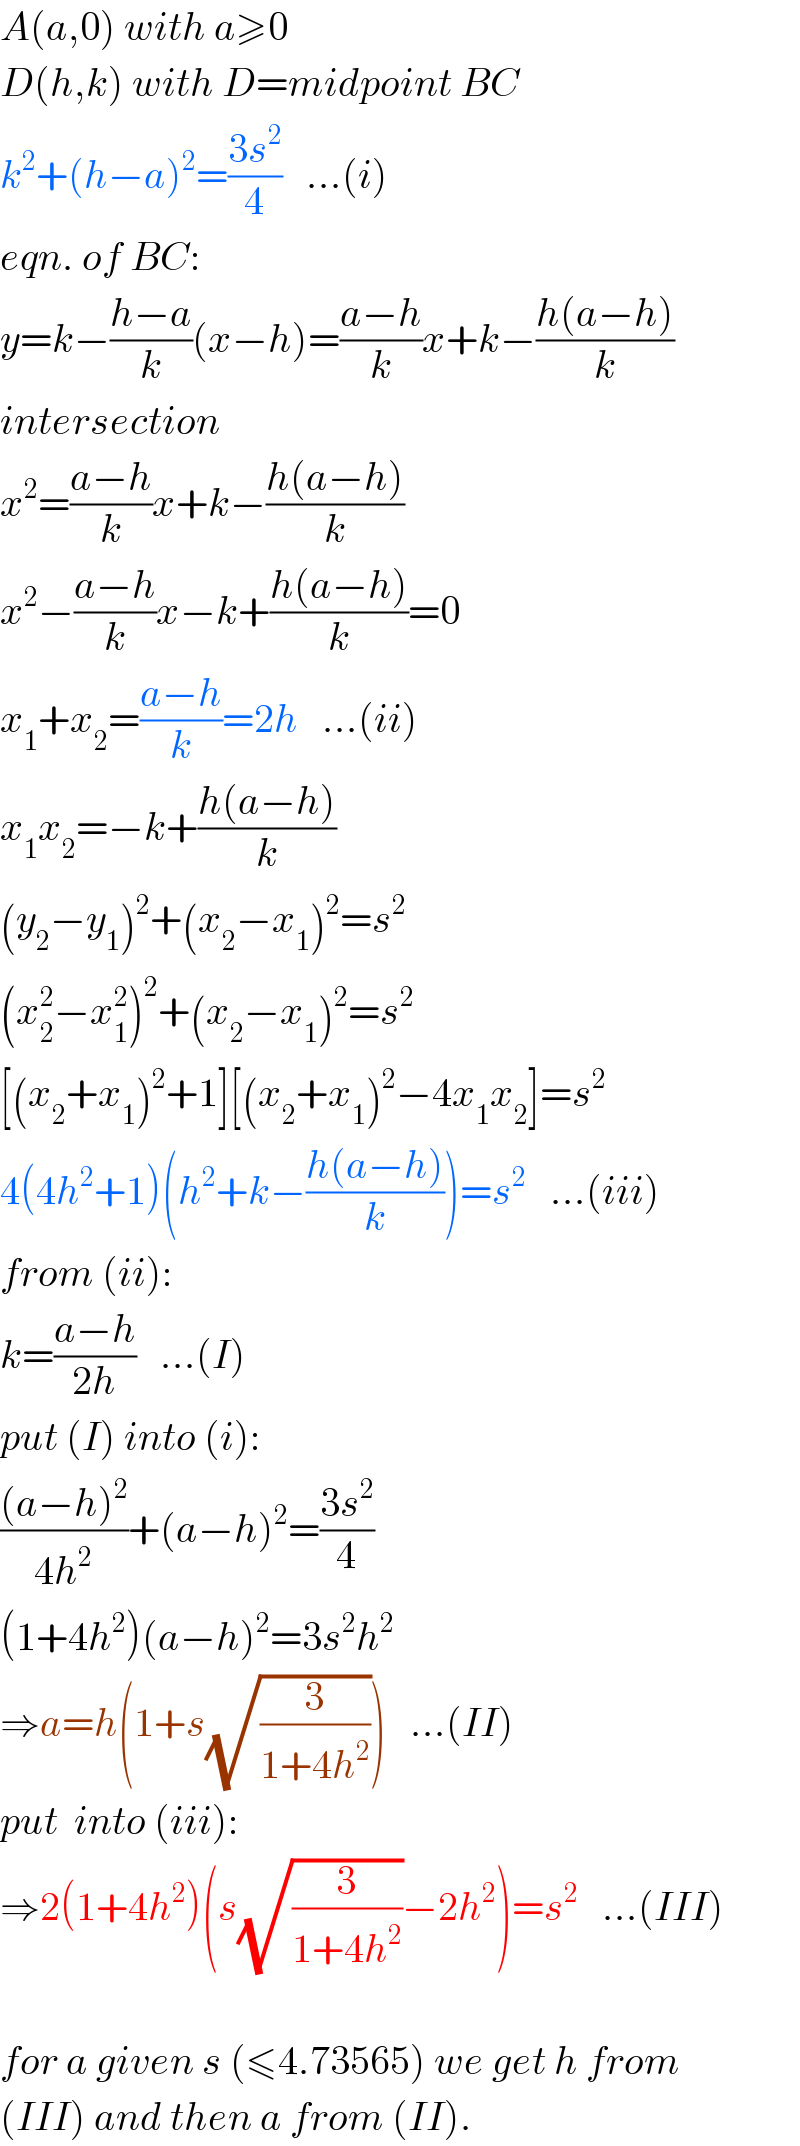 A(a,0) with a≥0  D(h,k) with D=midpoint BC  k^2 +(h−a)^2 =((3s^2 )/4)   ...(i)  eqn. of BC:  y=k−((h−a)/k)(x−h)=((a−h)/k)x+k−((h(a−h))/k)  intersection  x^2 =((a−h)/k)x+k−((h(a−h))/k)  x^2 −((a−h)/k)x−k+((h(a−h))/k)=0  x_1 +x_2 =((a−h)/k)=2h   ...(ii)  x_1 x_2 =−k+((h(a−h))/k)  (y_2 −y_1 )^2 +(x_2 −x_1 )^2 =s^2   (x_2 ^2 −x_1 ^2 )^2 +(x_2 −x_1 )^2 =s^2   [(x_2 +x_1 )^2 +1][(x_2 +x_1 )^2 −4x_1 x_2 ]=s^2   4(4h^2 +1)(h^2 +k−((h(a−h))/k))=s^2    ...(iii)  from (ii):  k=((a−h)/(2h))   ...(I)  put (I) into (i):  (((a−h)^2 )/(4h^2 ))+(a−h)^2 =((3s^2 )/4)  (1+4h^2 )(a−h)^2 =3s^2 h^2   ⇒a=h(1+s(√(3/(1+4h^2 ))))   ...(II)  put  into (iii):  ⇒2(1+4h^2 )(s(√(3/(1+4h^2 )))−2h^2 )=s^2    ...(III)    for a given s (≤4.73565) we get h from  (III) and then a from (II).  